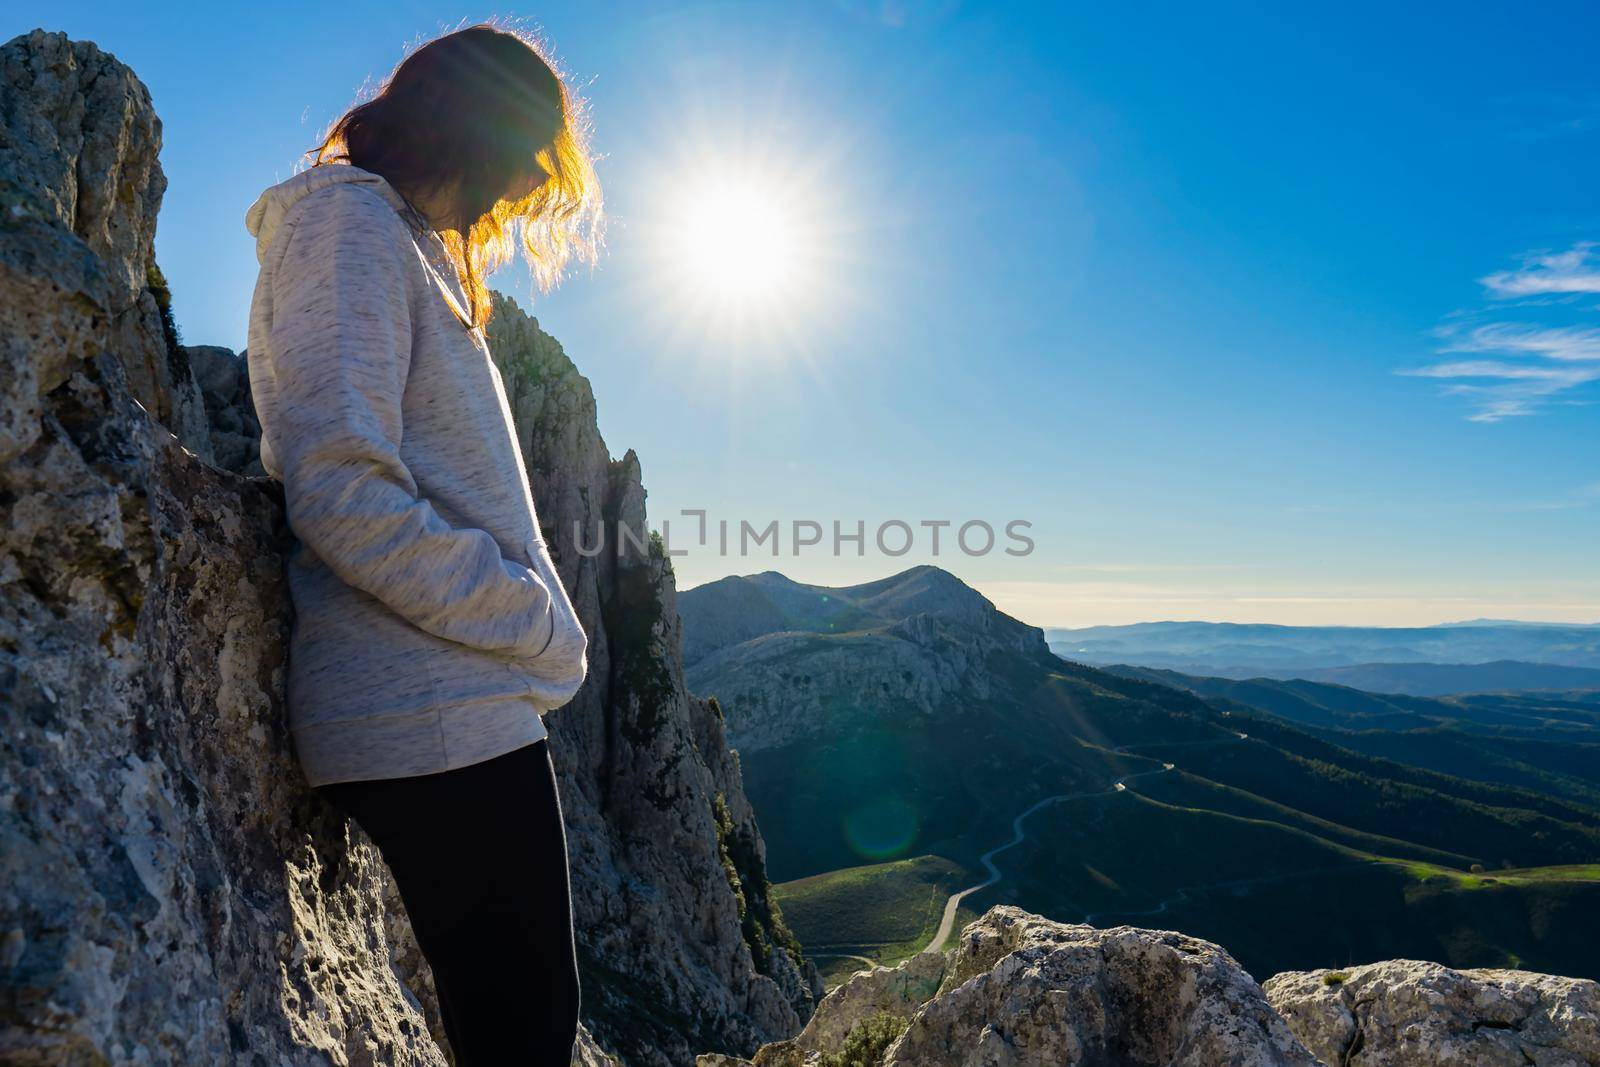 Lonely woman finds herself leaning against the rocks in the nature pensive at top of mountains with a splendid view below and sun through her hair. Concept of positive loneliness to find your own way